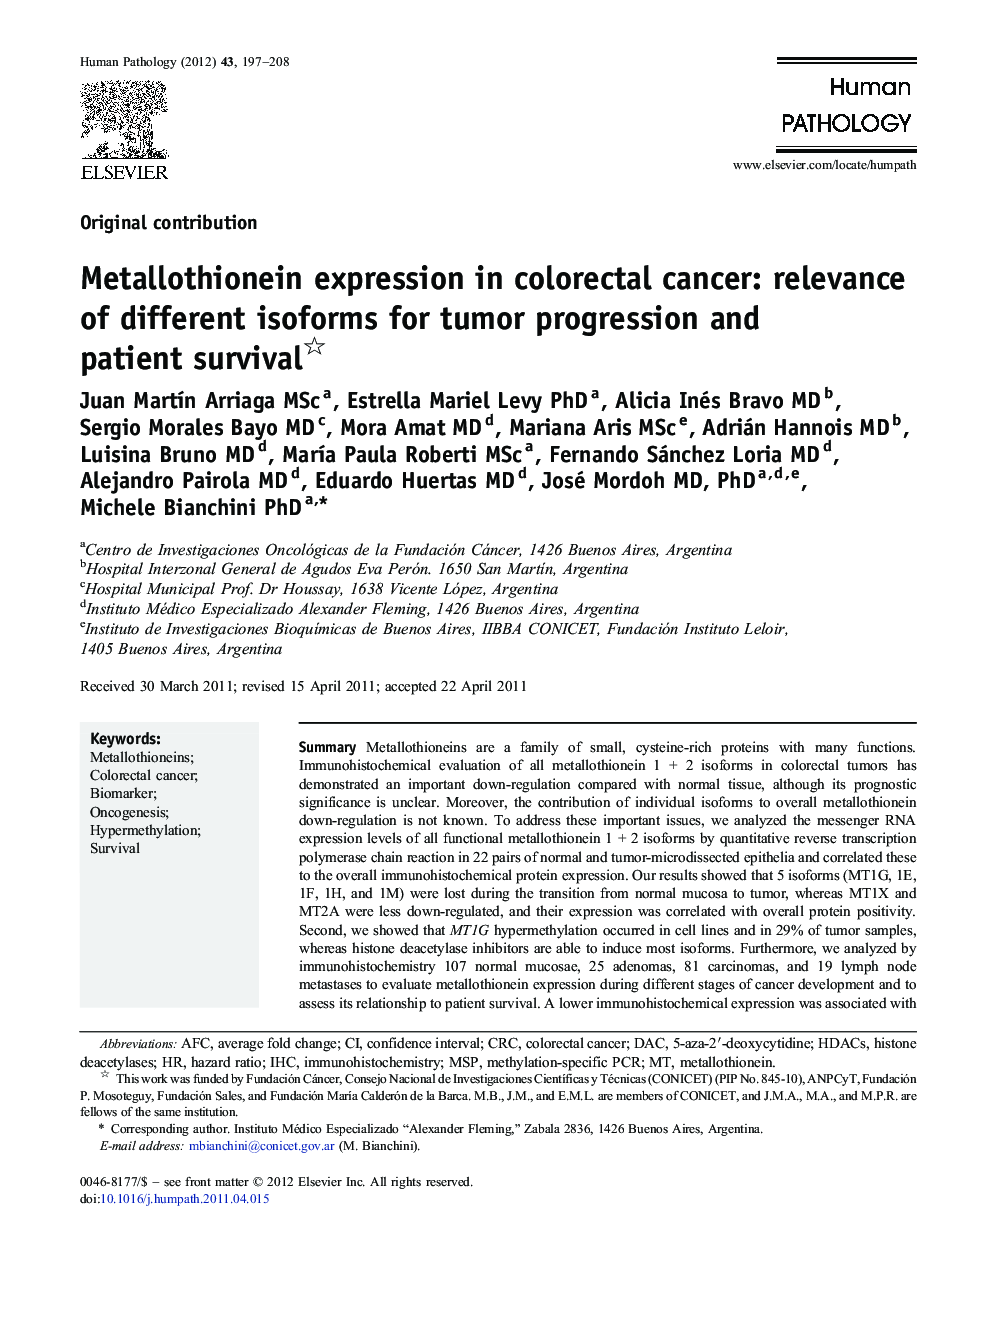 Metallothionein expression in colorectal cancer: relevance of different isoforms for tumor progression and patient survival 